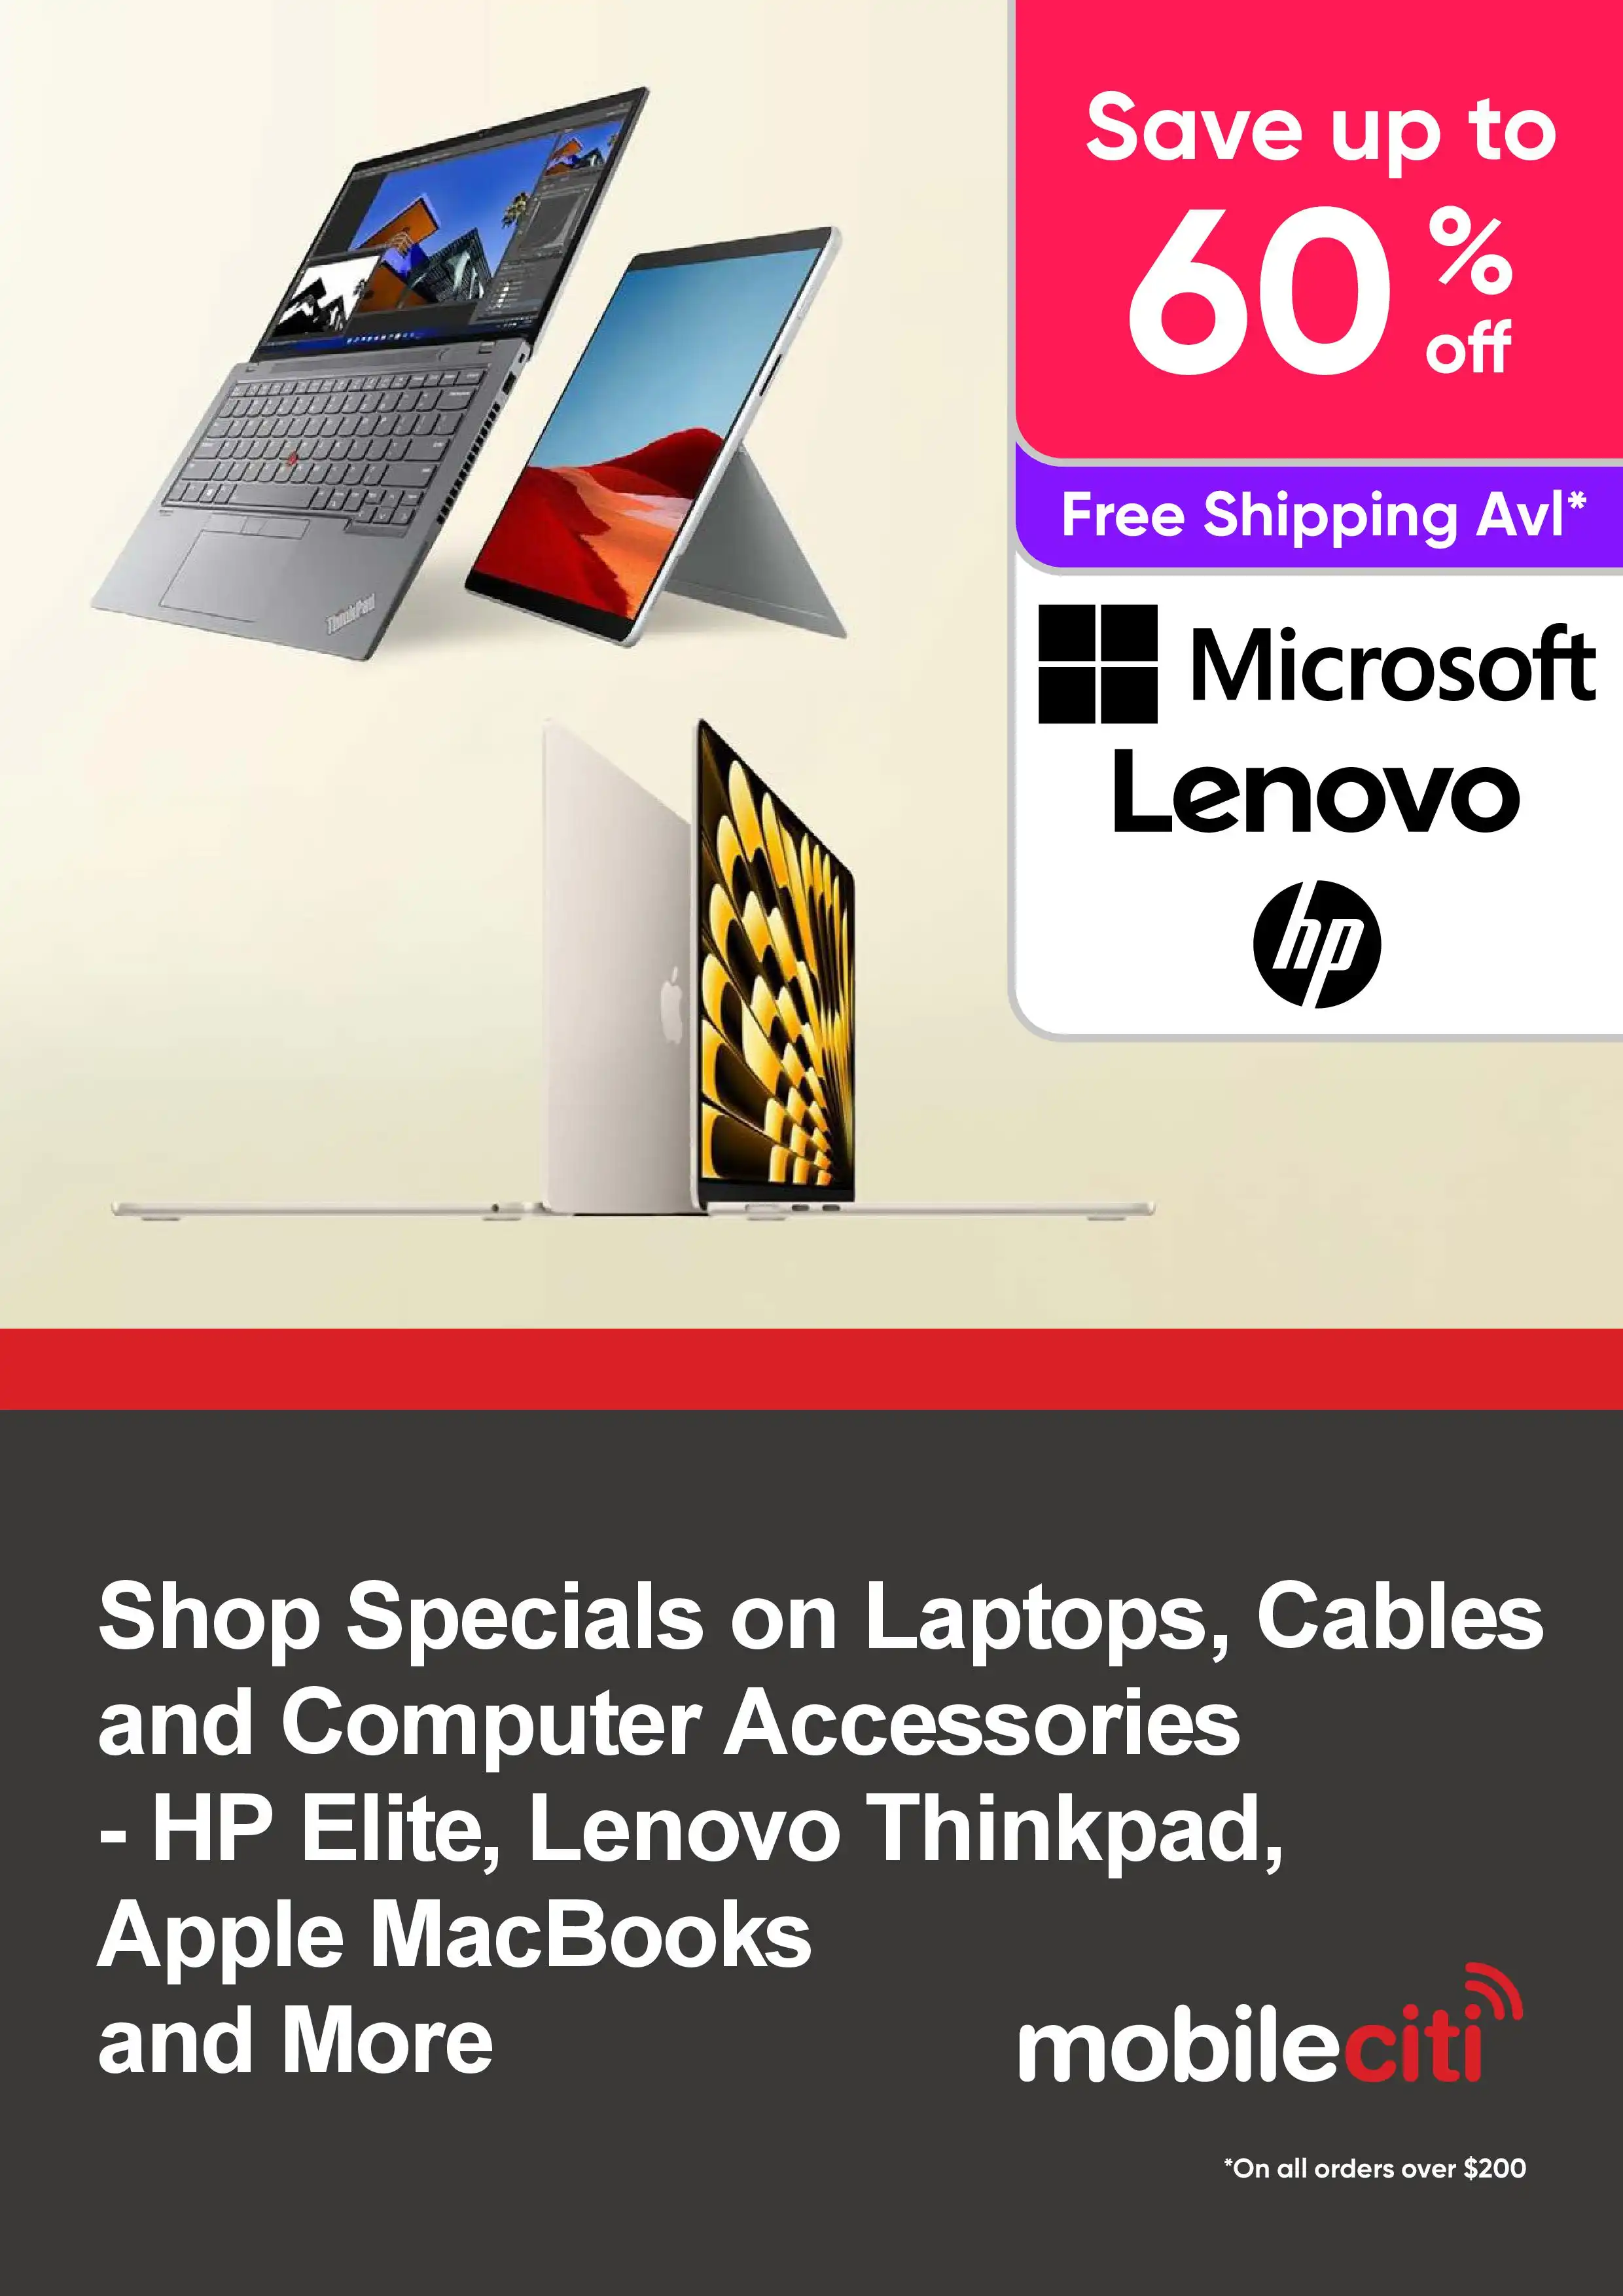 Shop Specials on Laptops, Cables and Computer Accessories - Save Up to 60% Off, HP Elite, Lenovo Thinpad, Apple MacBooks and More